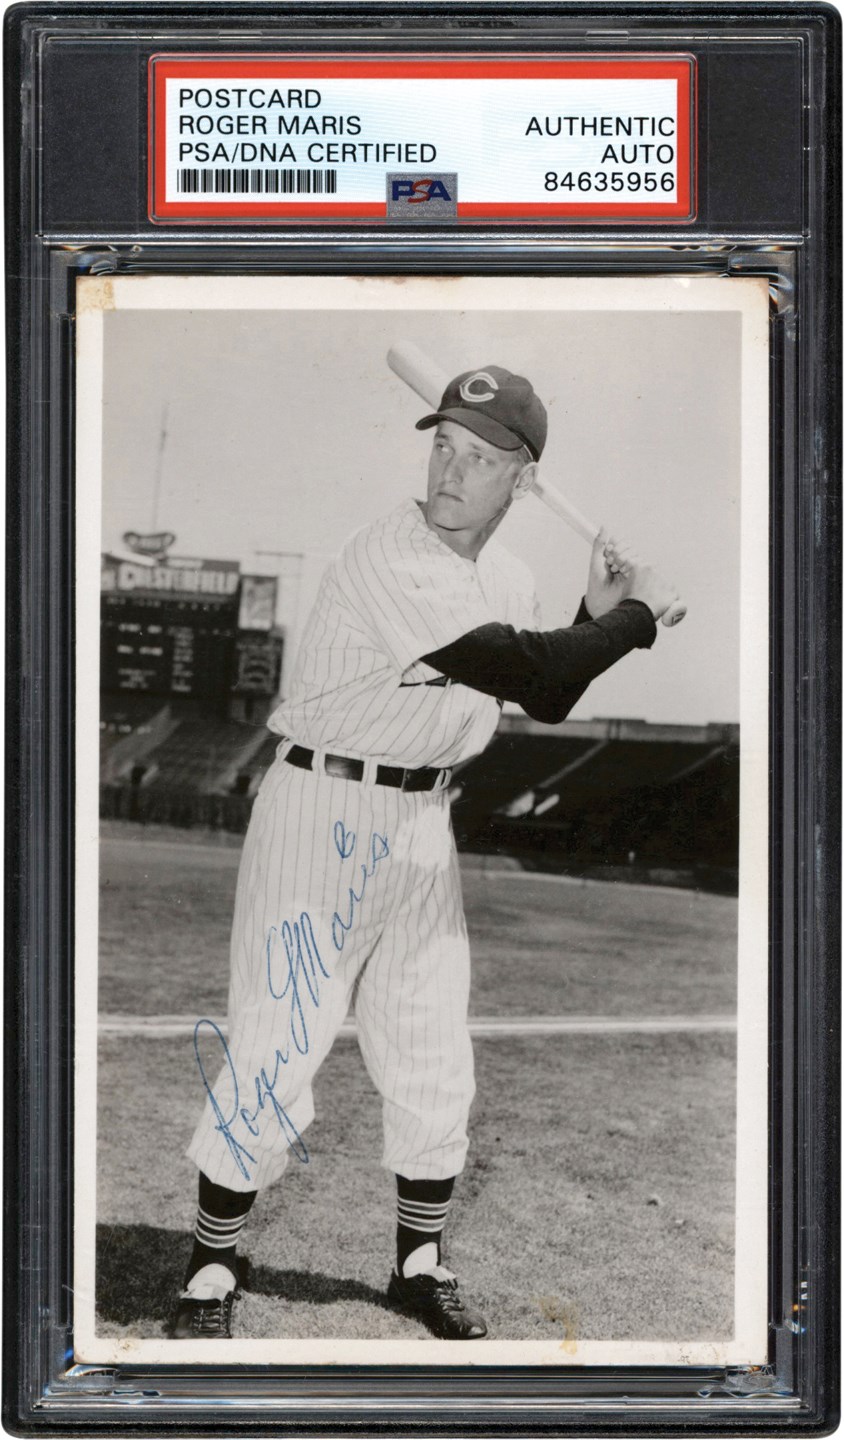 Baseball Autographs - 1957 Roger Maris Rookie Signed Cleveland Indians Team-Issued Real Photo Postcard (PSA)